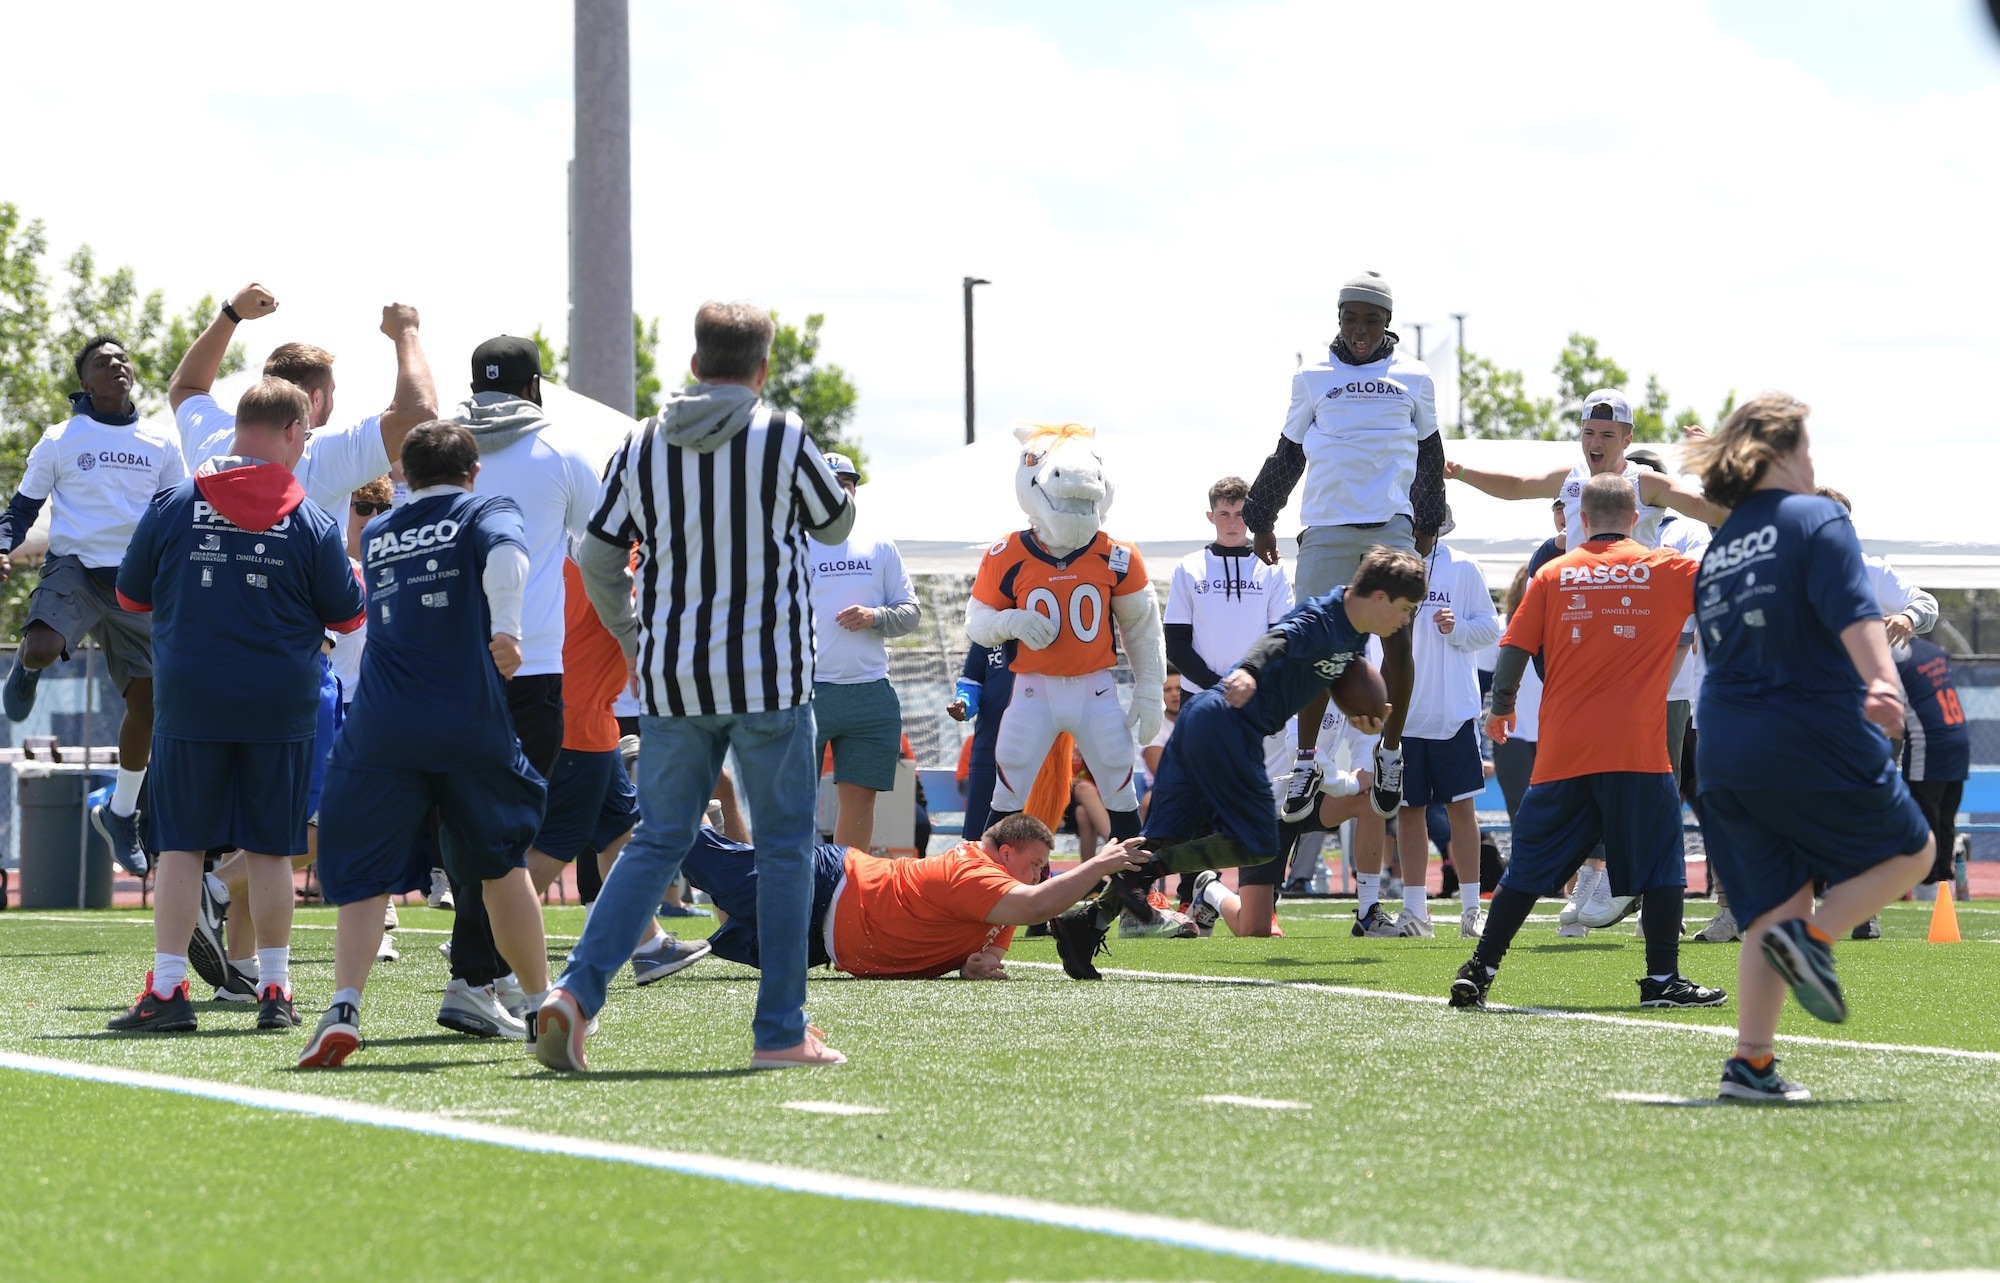 A player with the Orange Team tackles his opponent during the Dare to Play football event June 22, 2019, in Highlands Ranch, Colorado.